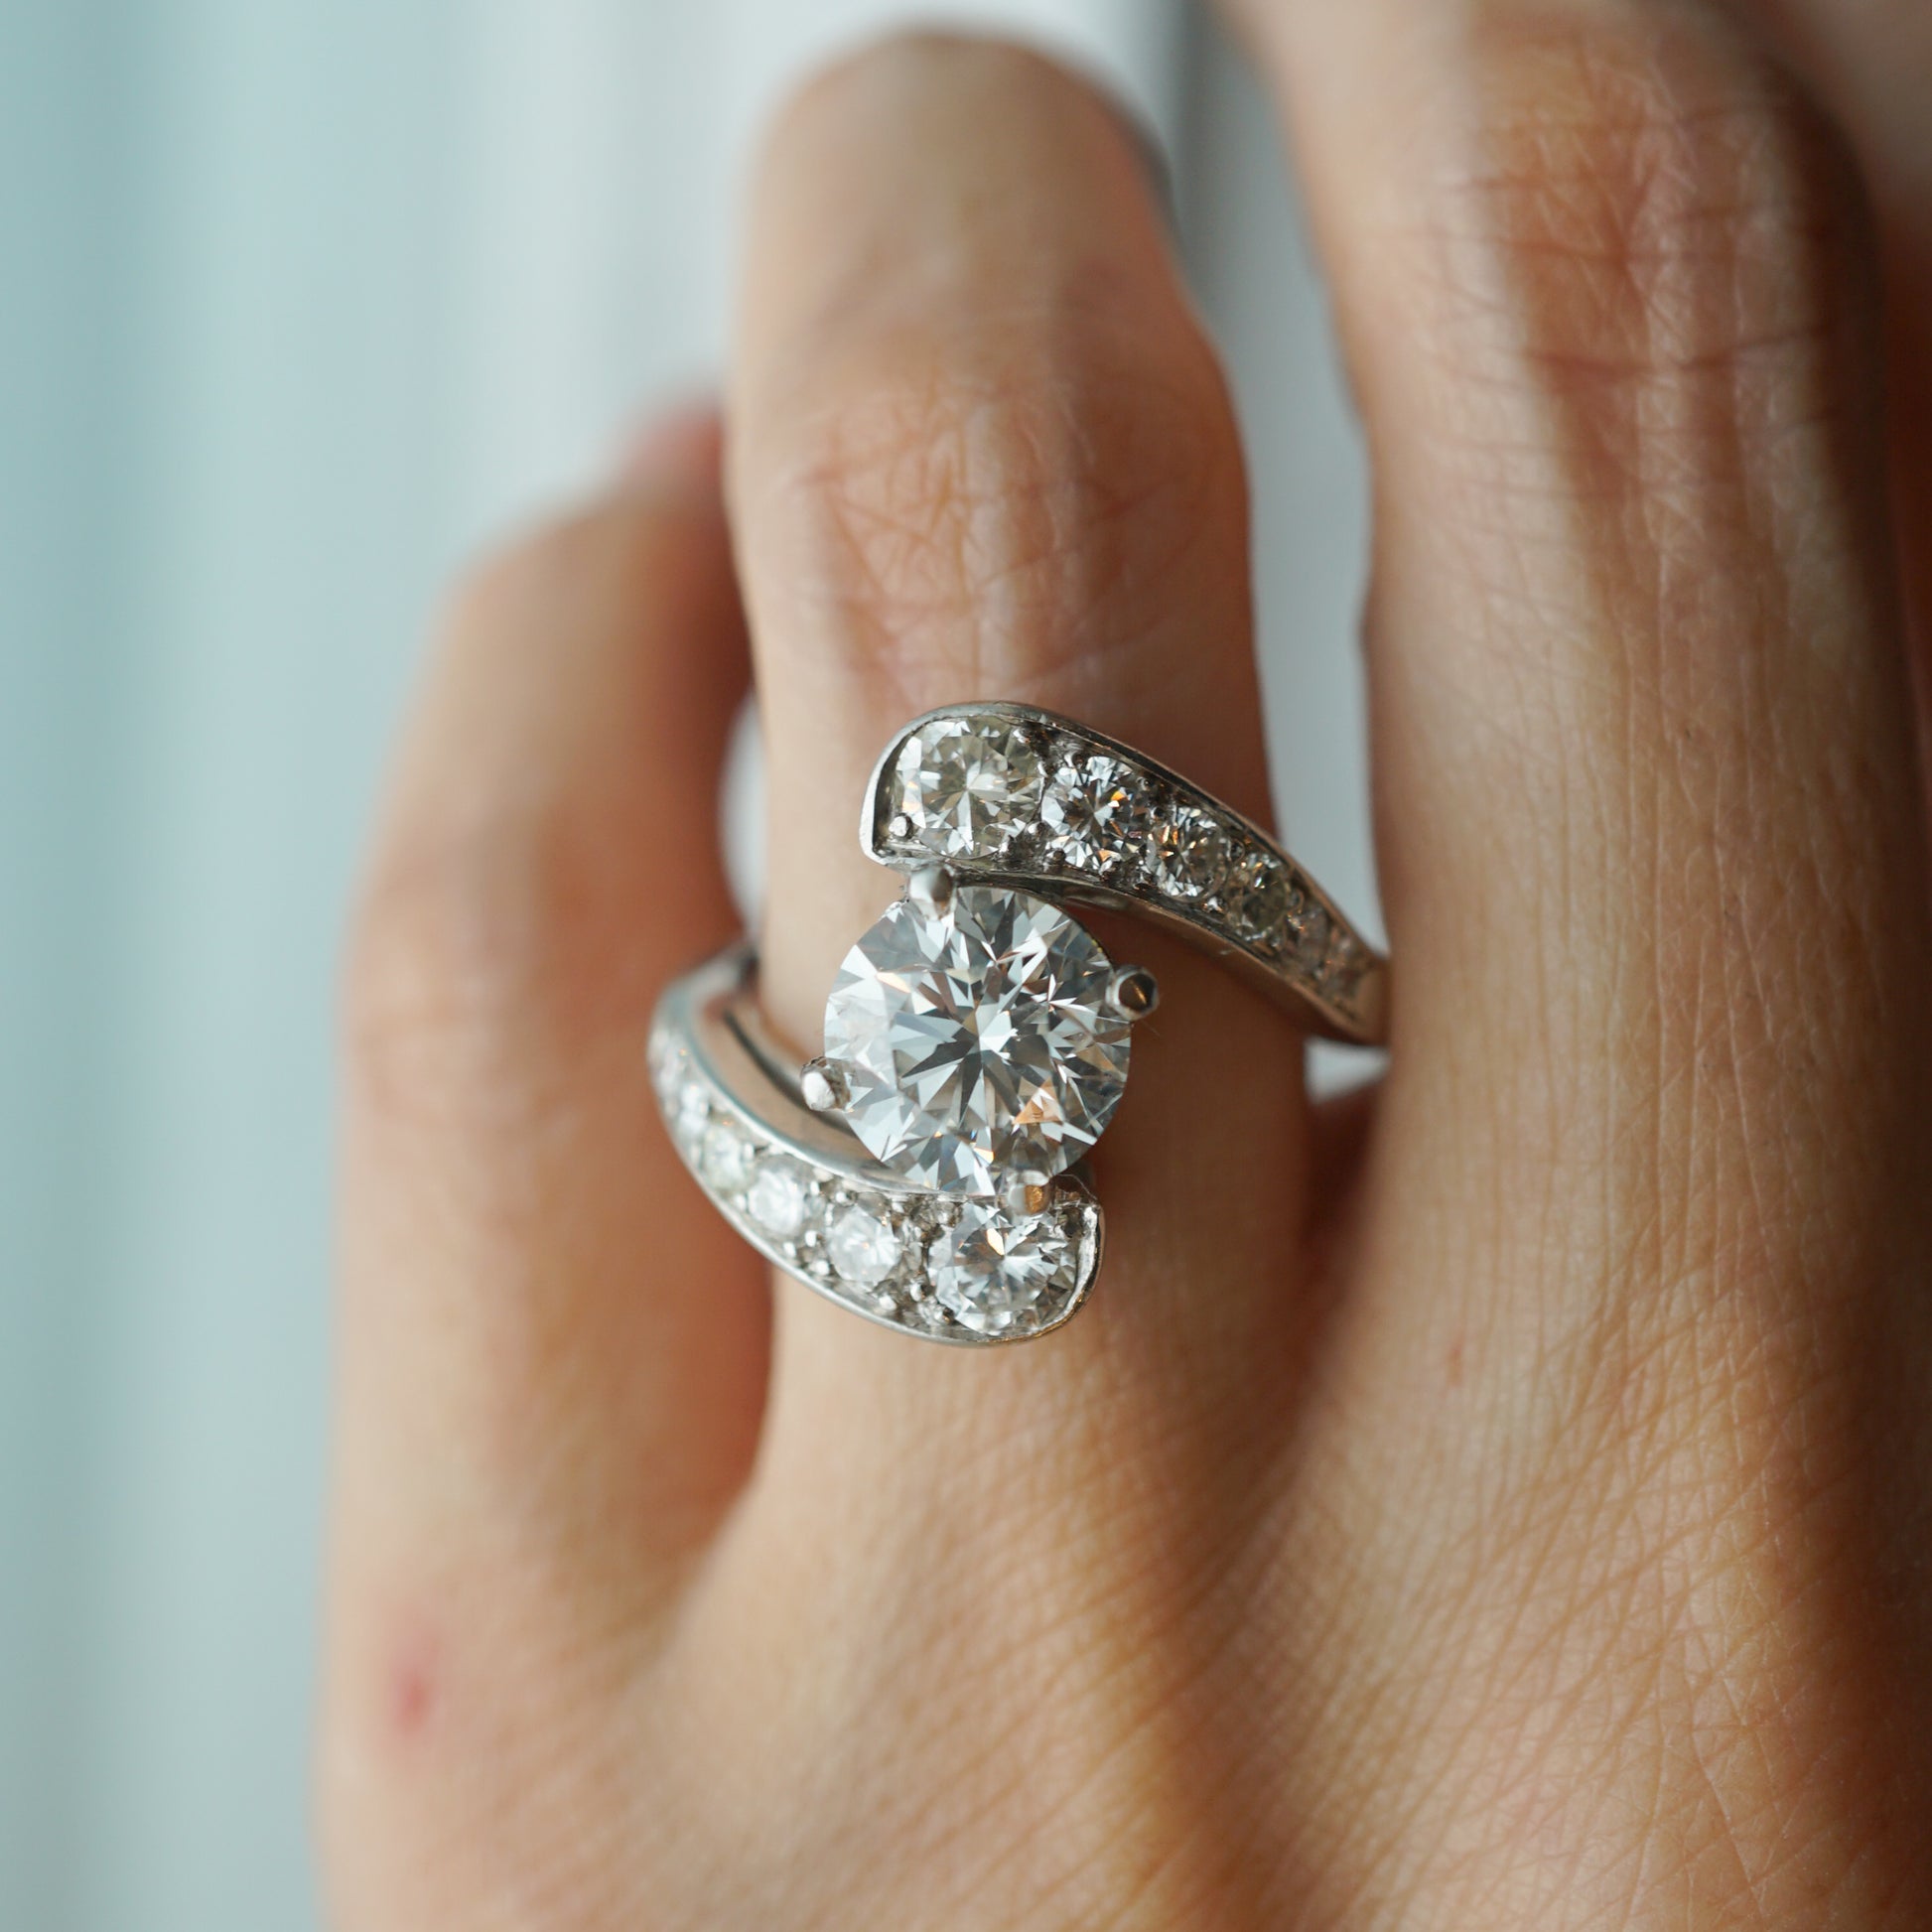 Mid-Century Bypass Diamond Engagement Ring in PlatinumComposition: Platinum Ring Size: 7 Total Diamond Weight: 3.01ct Total Gram Weight: 8.2 g Inscription: 10%
      